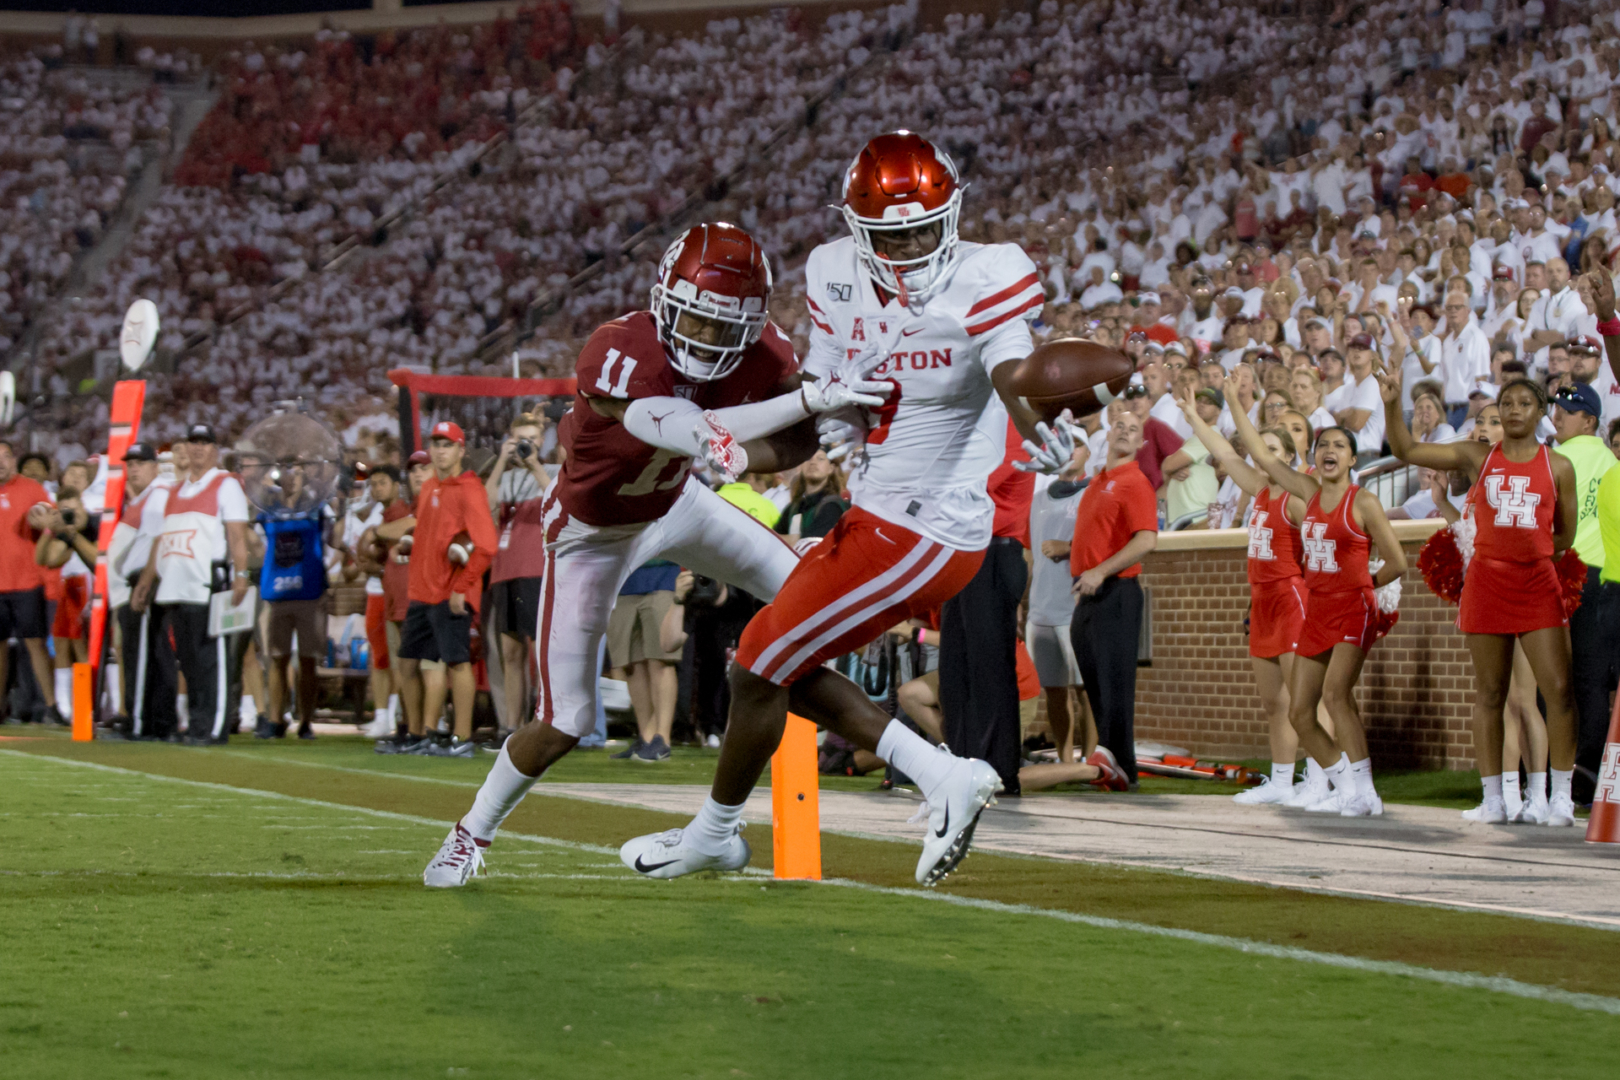 The Cougars are going into their game versus the Panthers after a 49-31 loss to Oklahoma. | Trevor Nolley/The Cougar